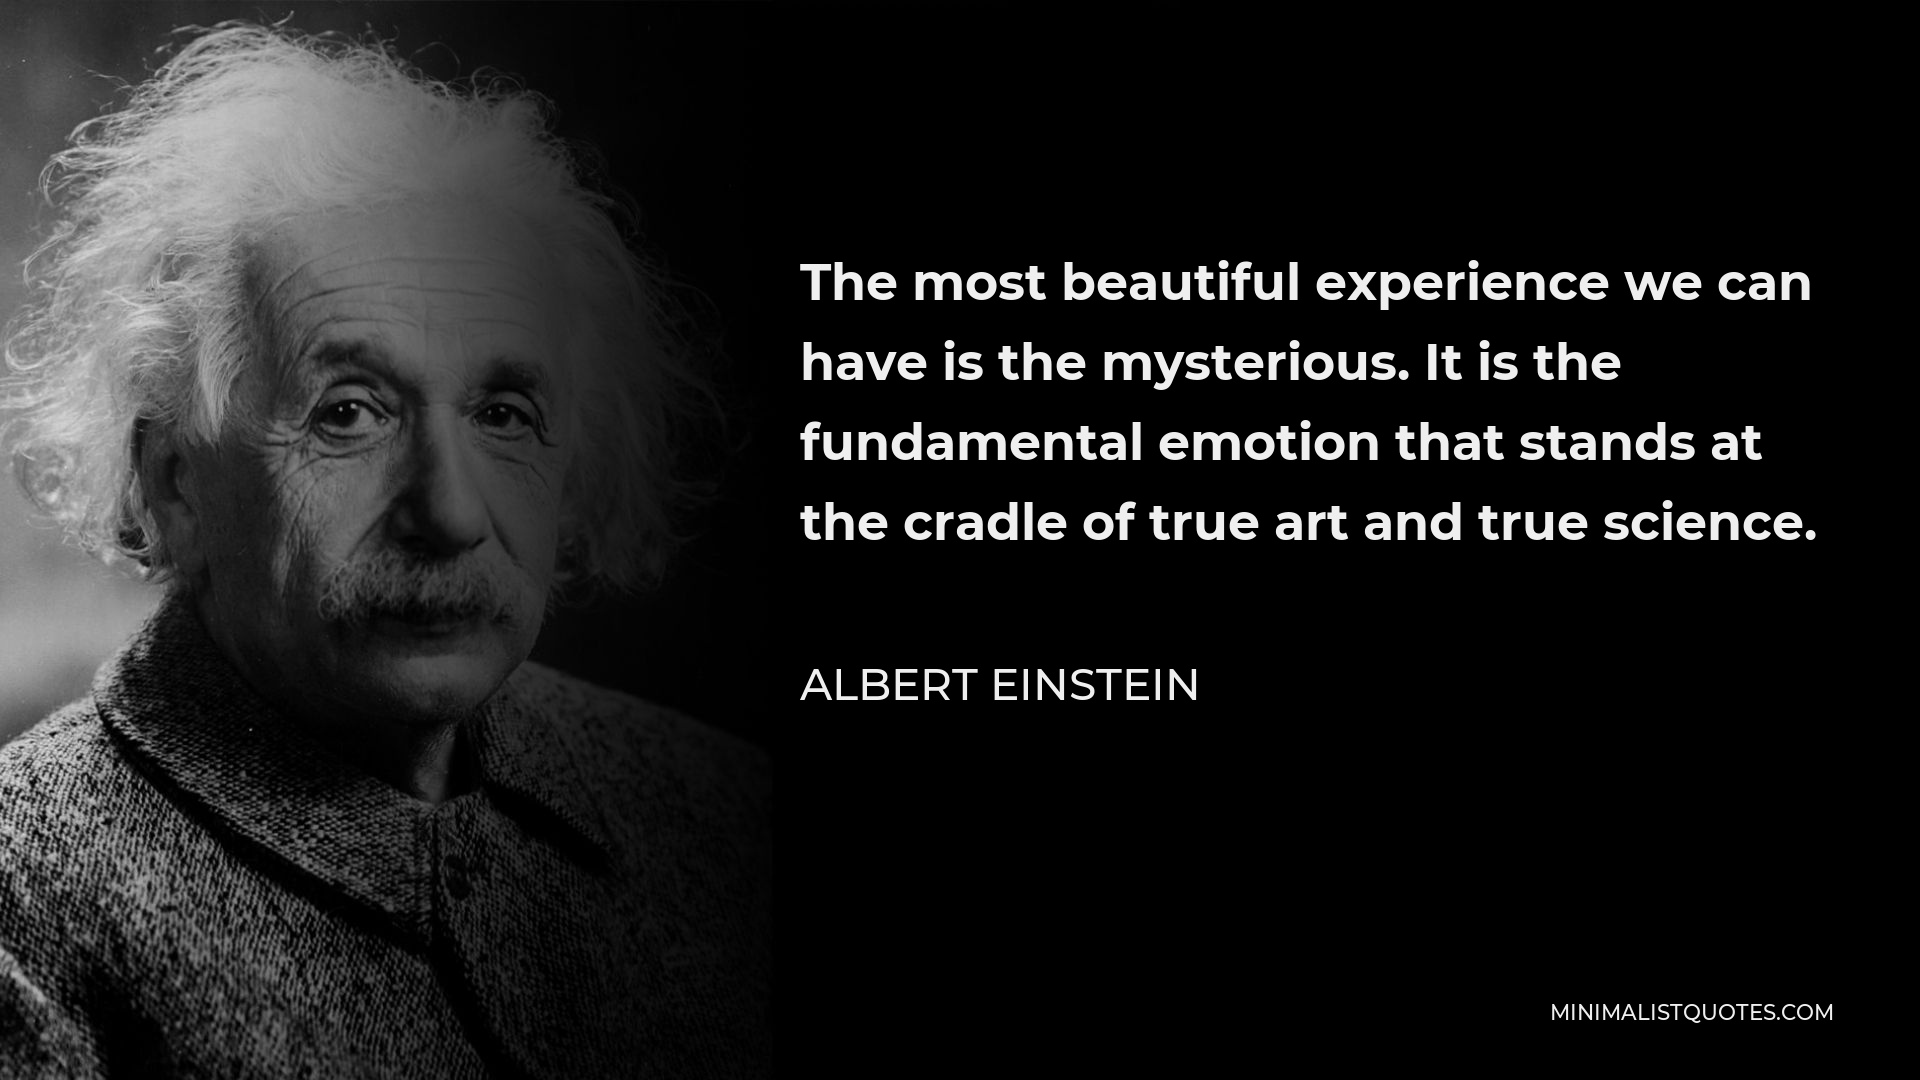 Albert Einstein Quote - The most beautiful experience we can have is the mysterious. It is the fundamental emotion that stands at the cradle of true art and true science.